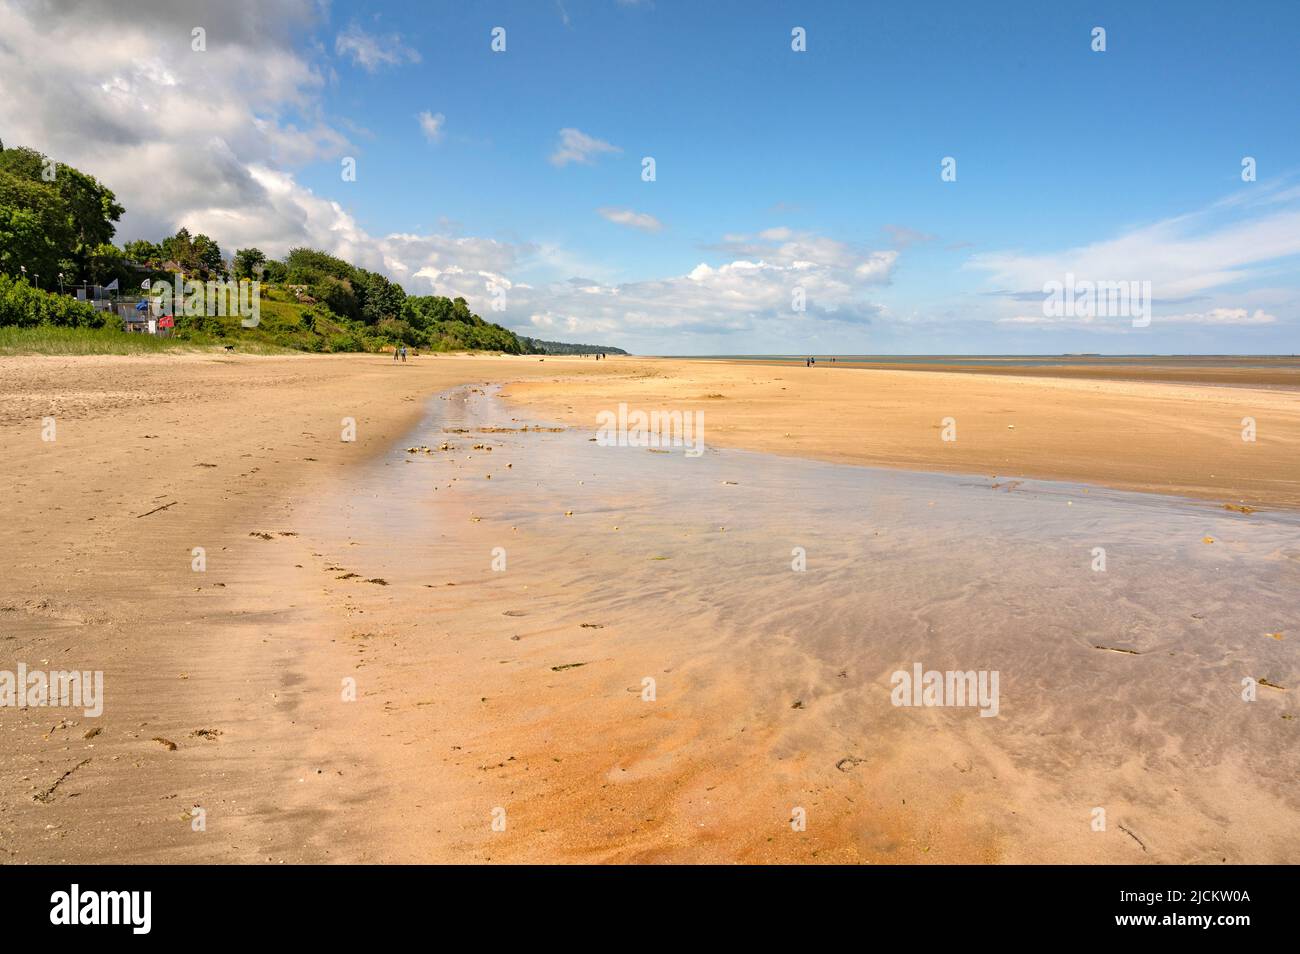 The beach  Plage du Butin at the Seine estuary of Honfleur on the left bank of the Seine river opposite Le Havre, Normandy, France Stock Photo